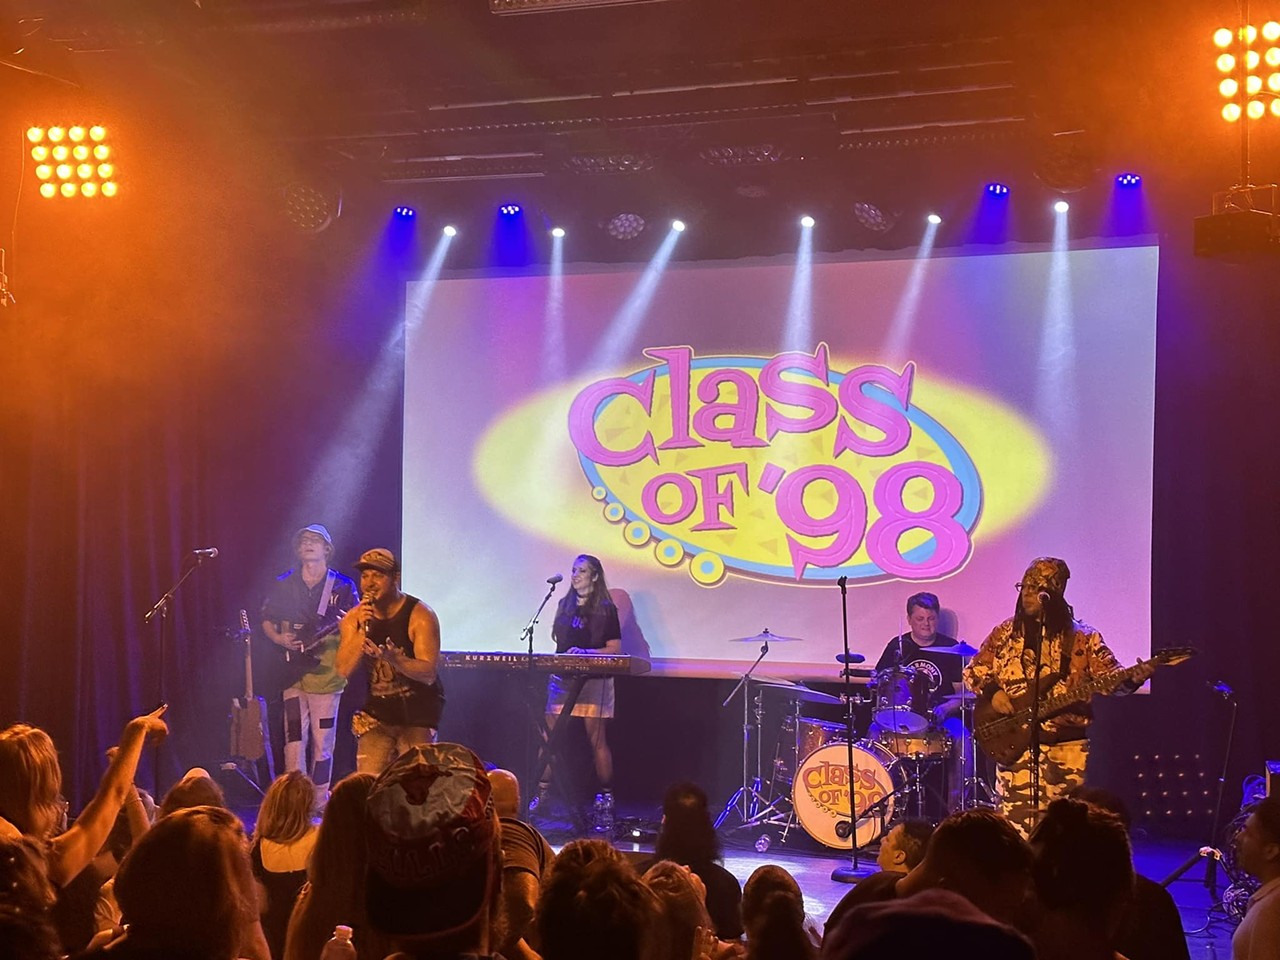 
Class of 98 Band, The 90s Party Palooza
When: Dec. 15 at 8 p.m.
Where: Magic Bag
What: A ’90s dance party
Who: You and the homies
Why: The event is promoting itself as “Detroit’s biggest ’90s party.”